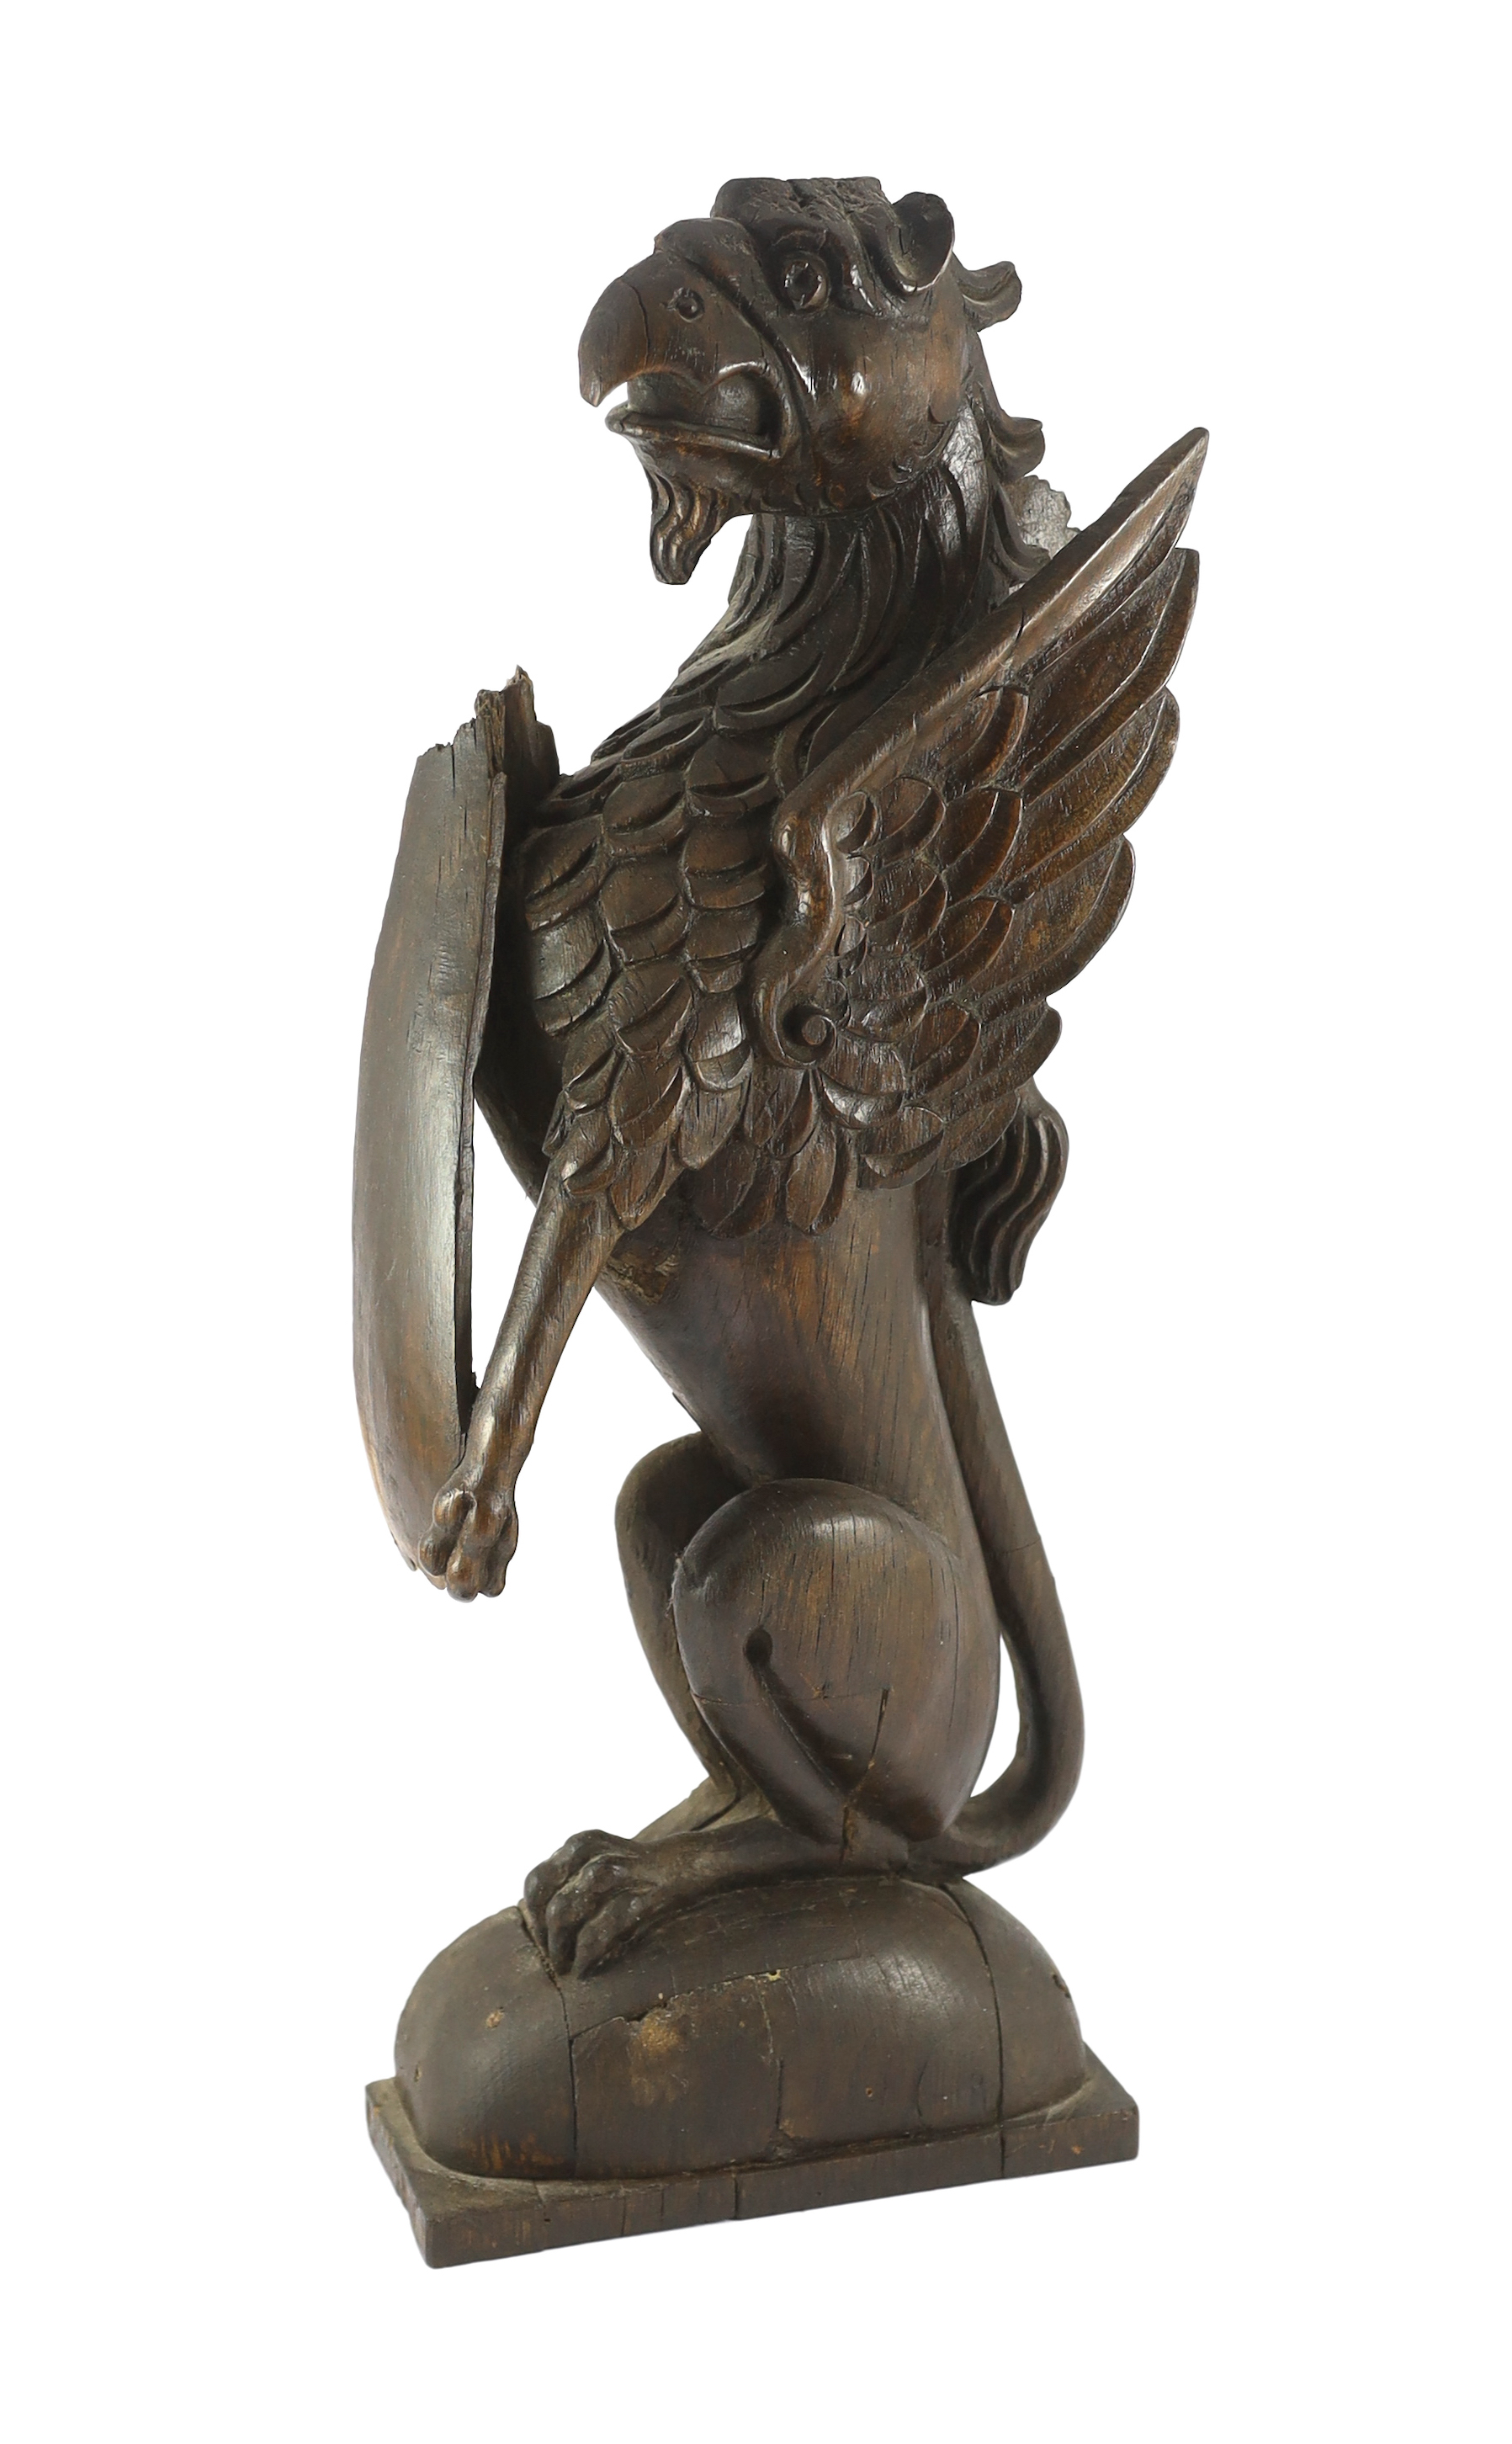 A 16th century Dutch carved oak model of a griffin rampant holding a shield                                                                                                                                                 